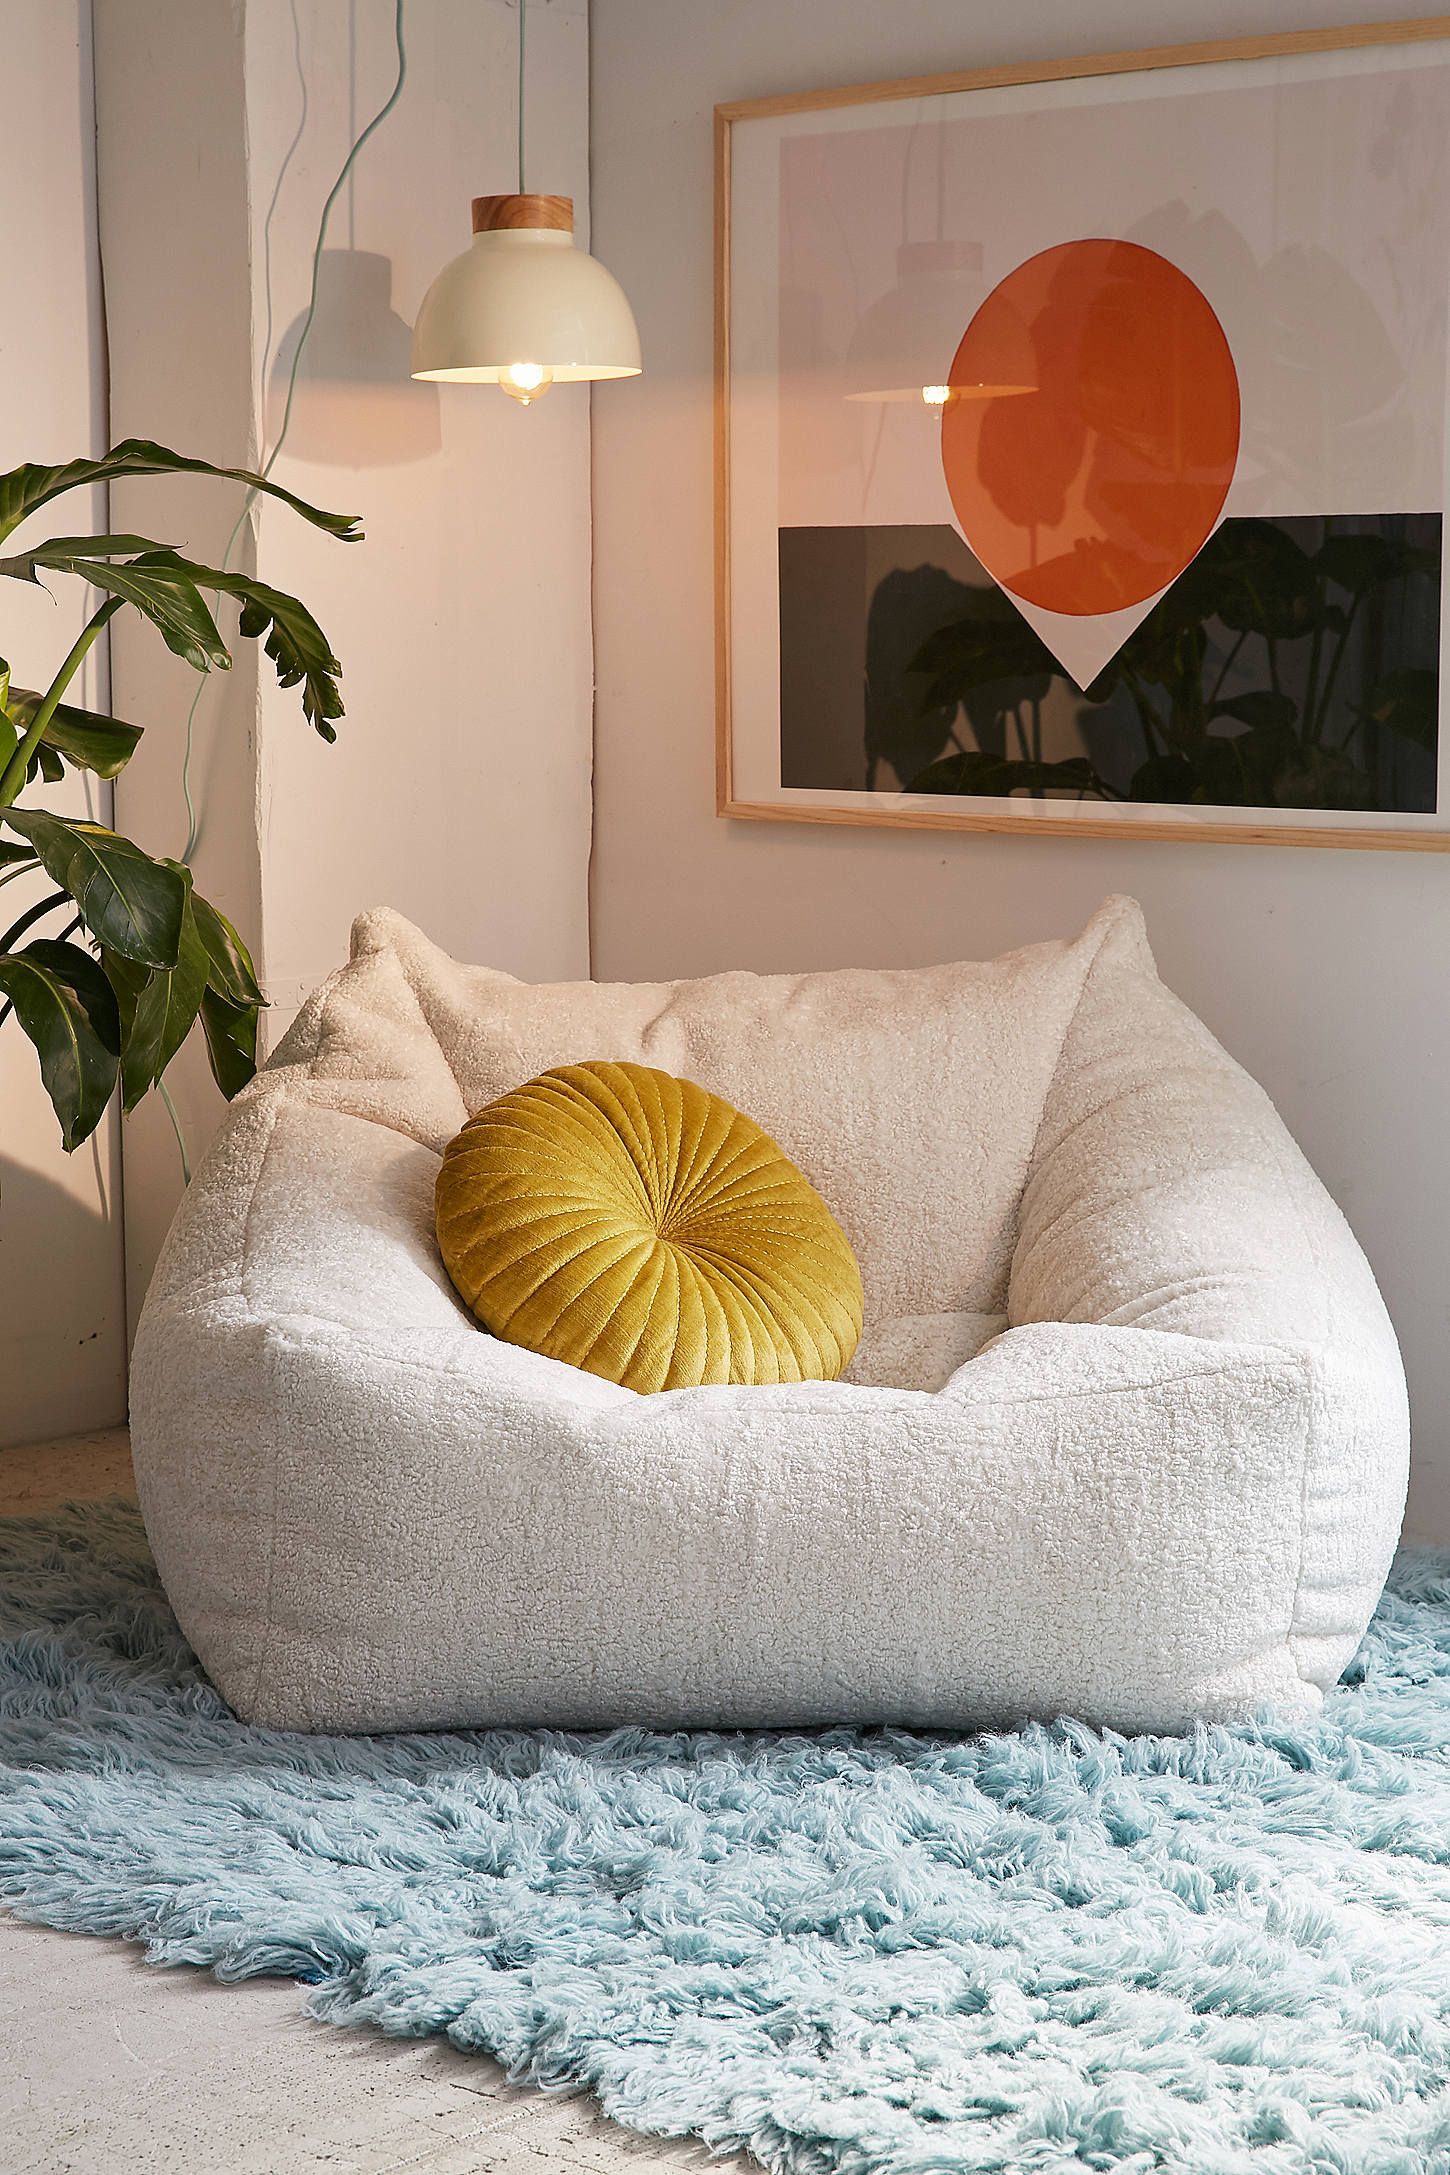 Bean Bag Chair for A Comfortable Seat